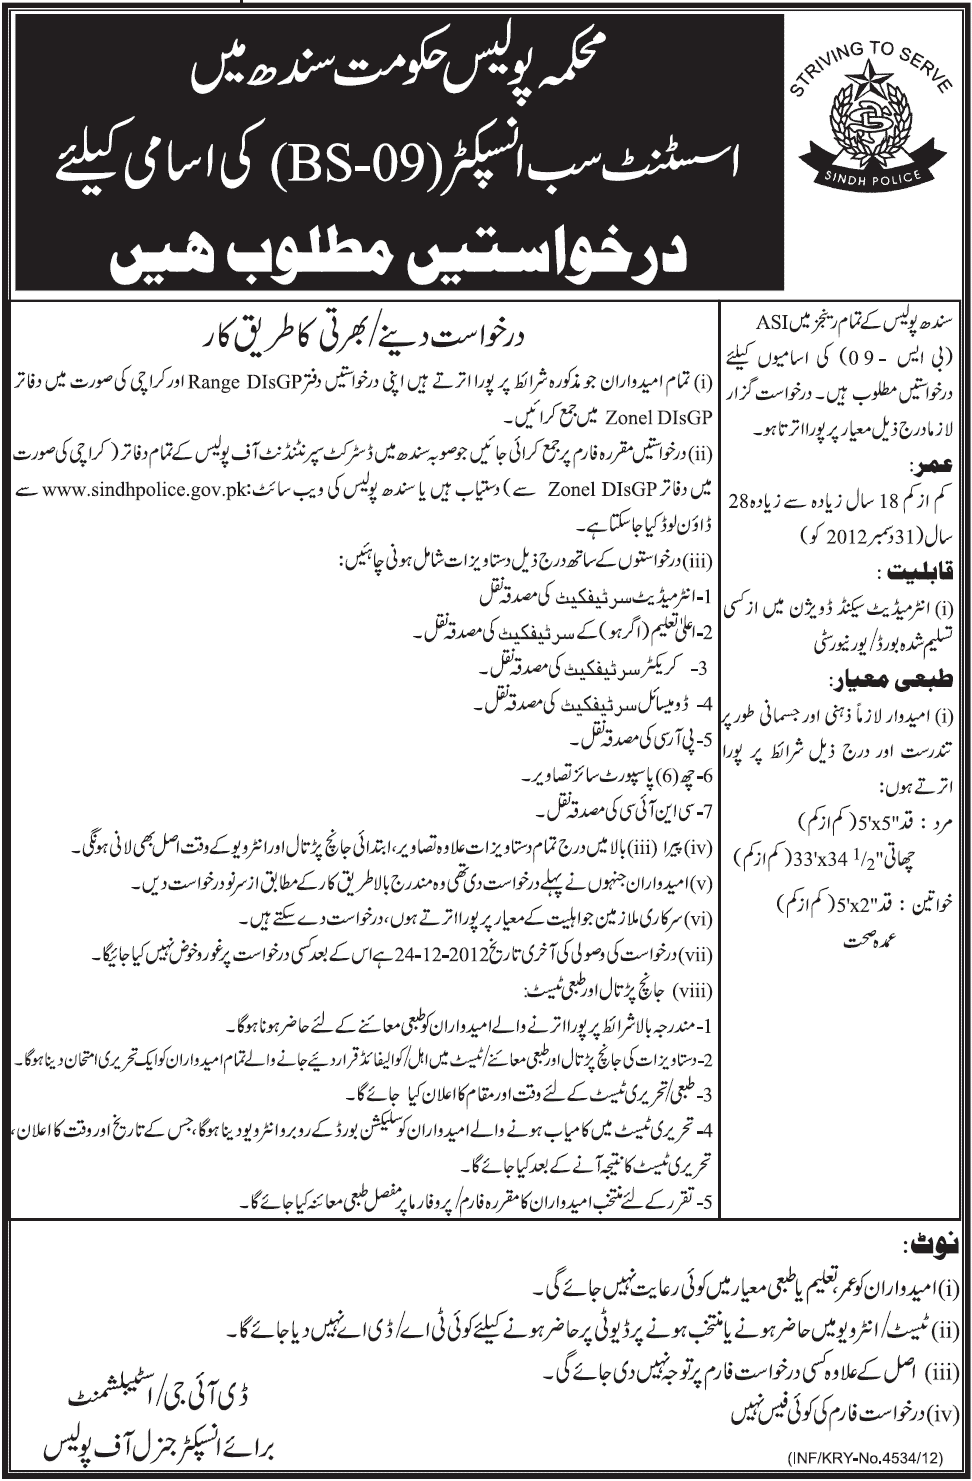 Sindh Police Jobs 2012 ASI (Assistant Sub Inspector) www.sindhpolice.gov.pk